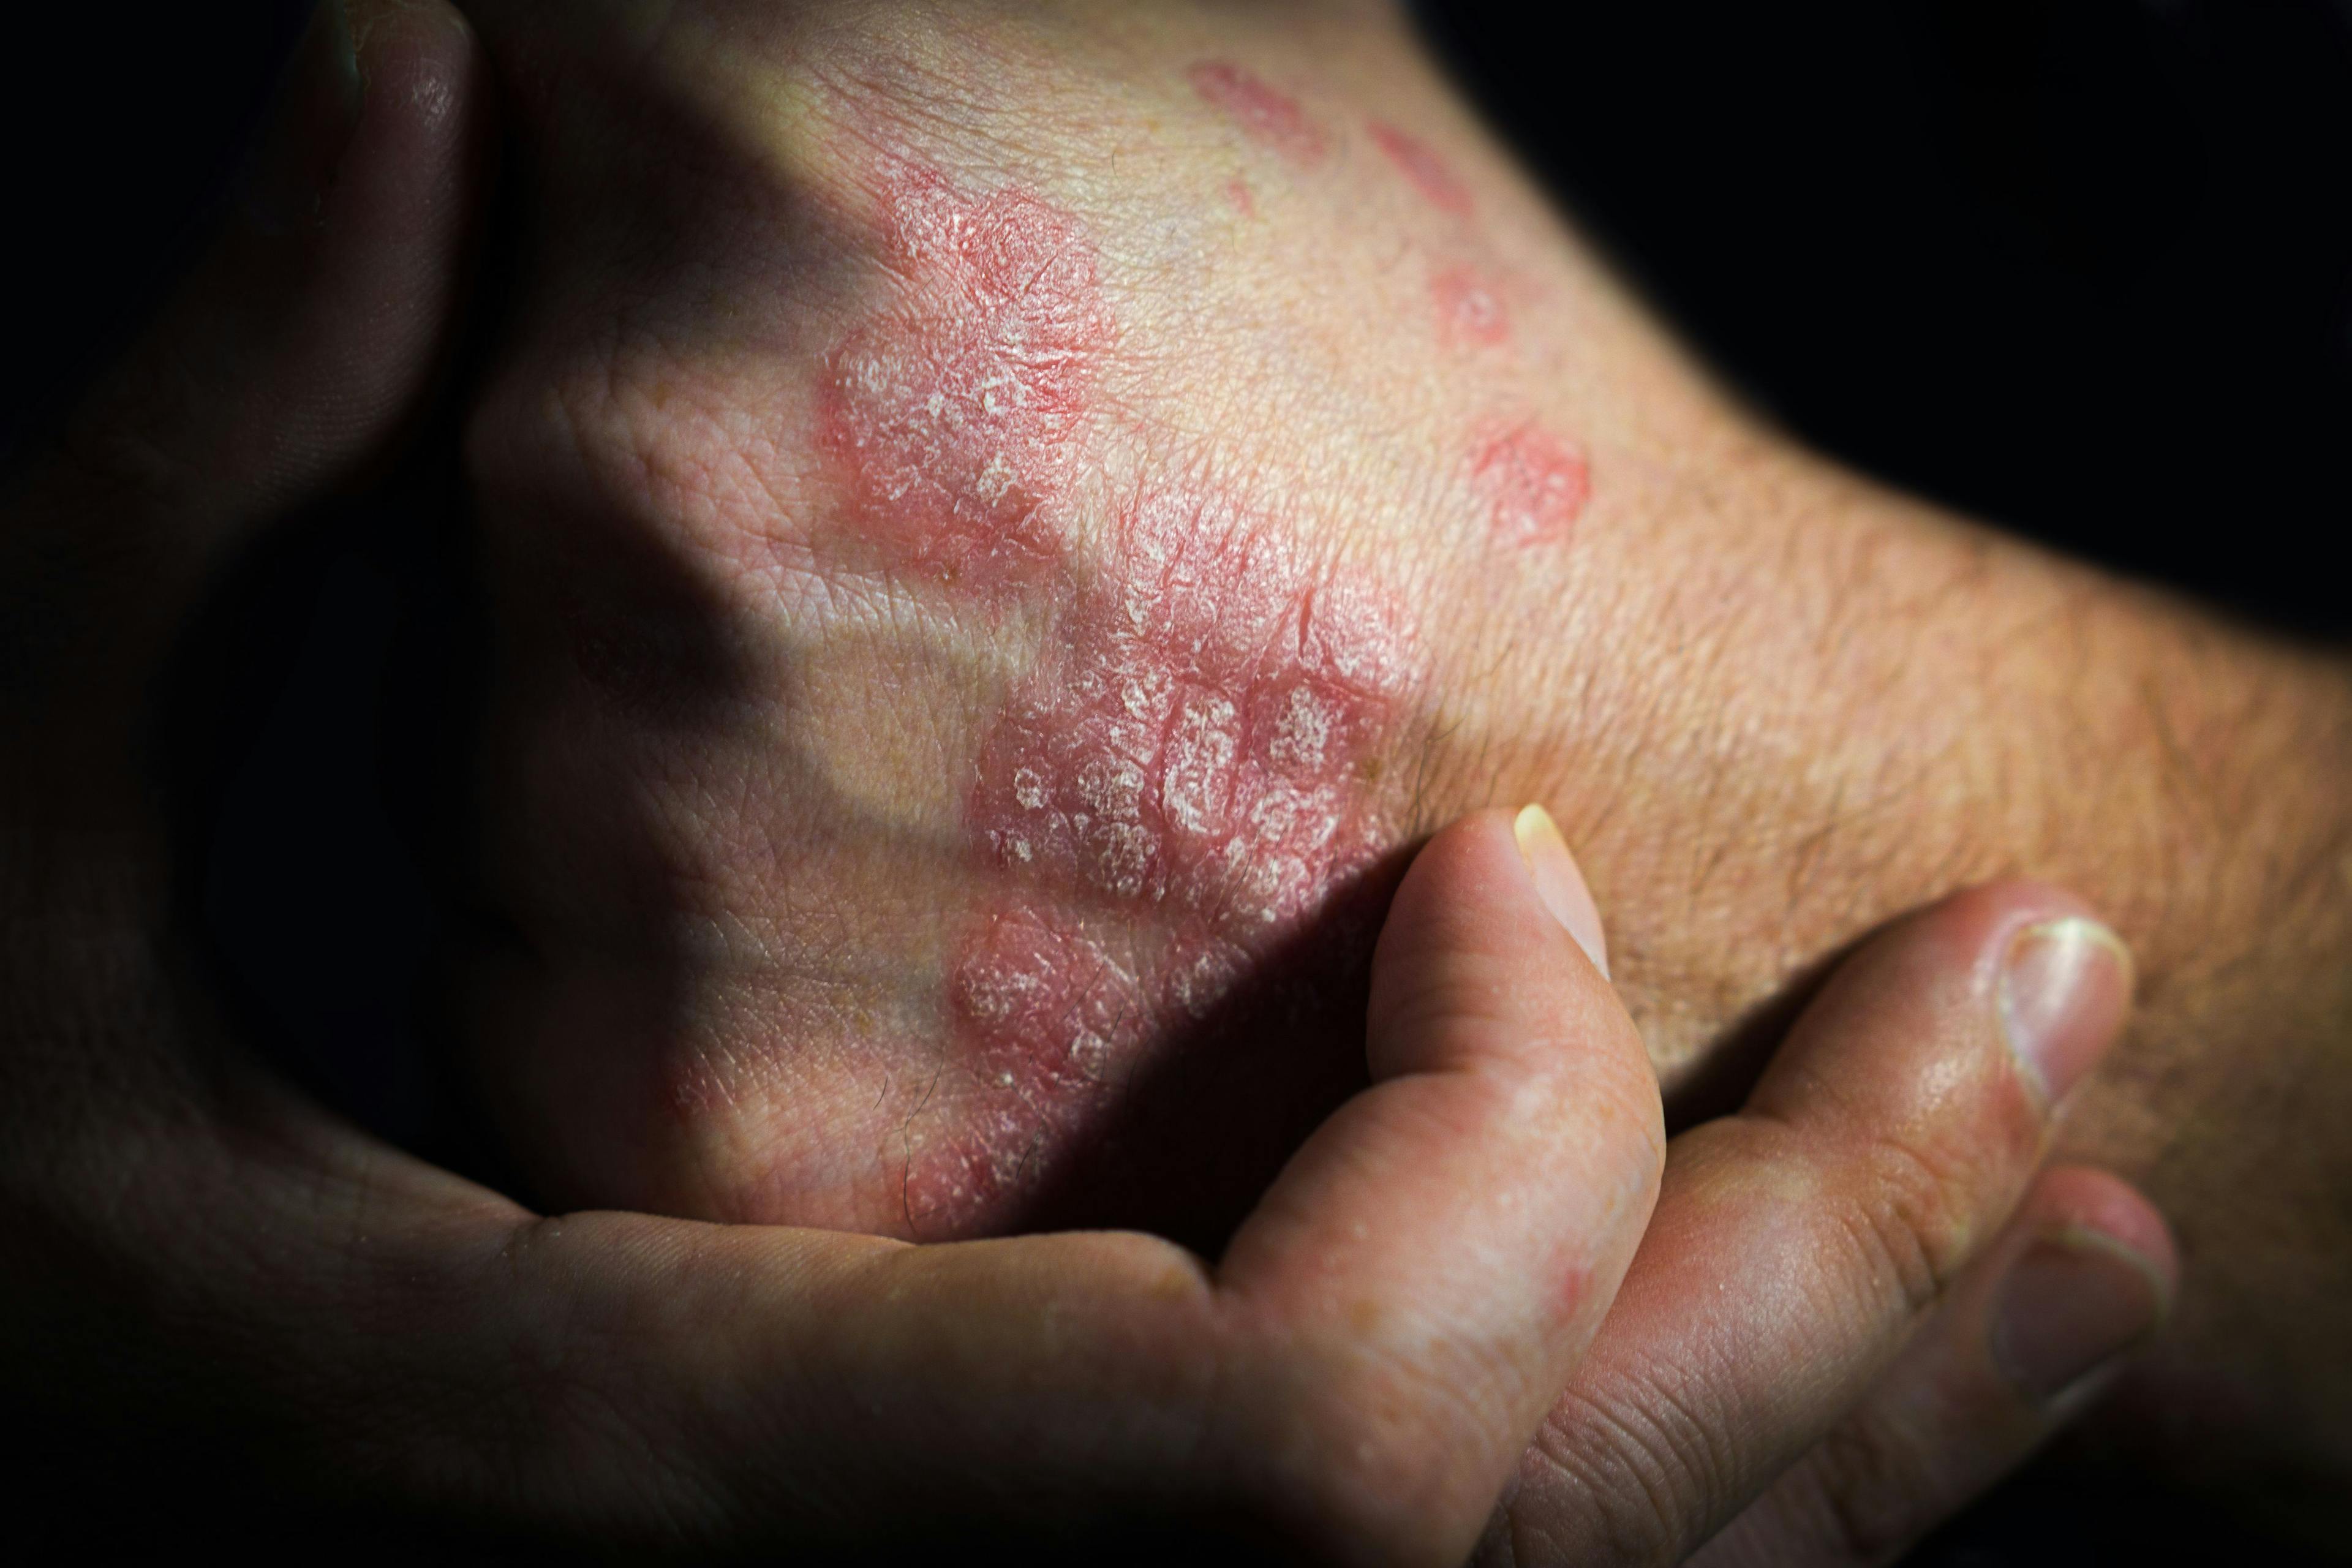 JAMA Publishes Roflumilast Cream Phase 3 Trial Results for Plaque Psoriasis  